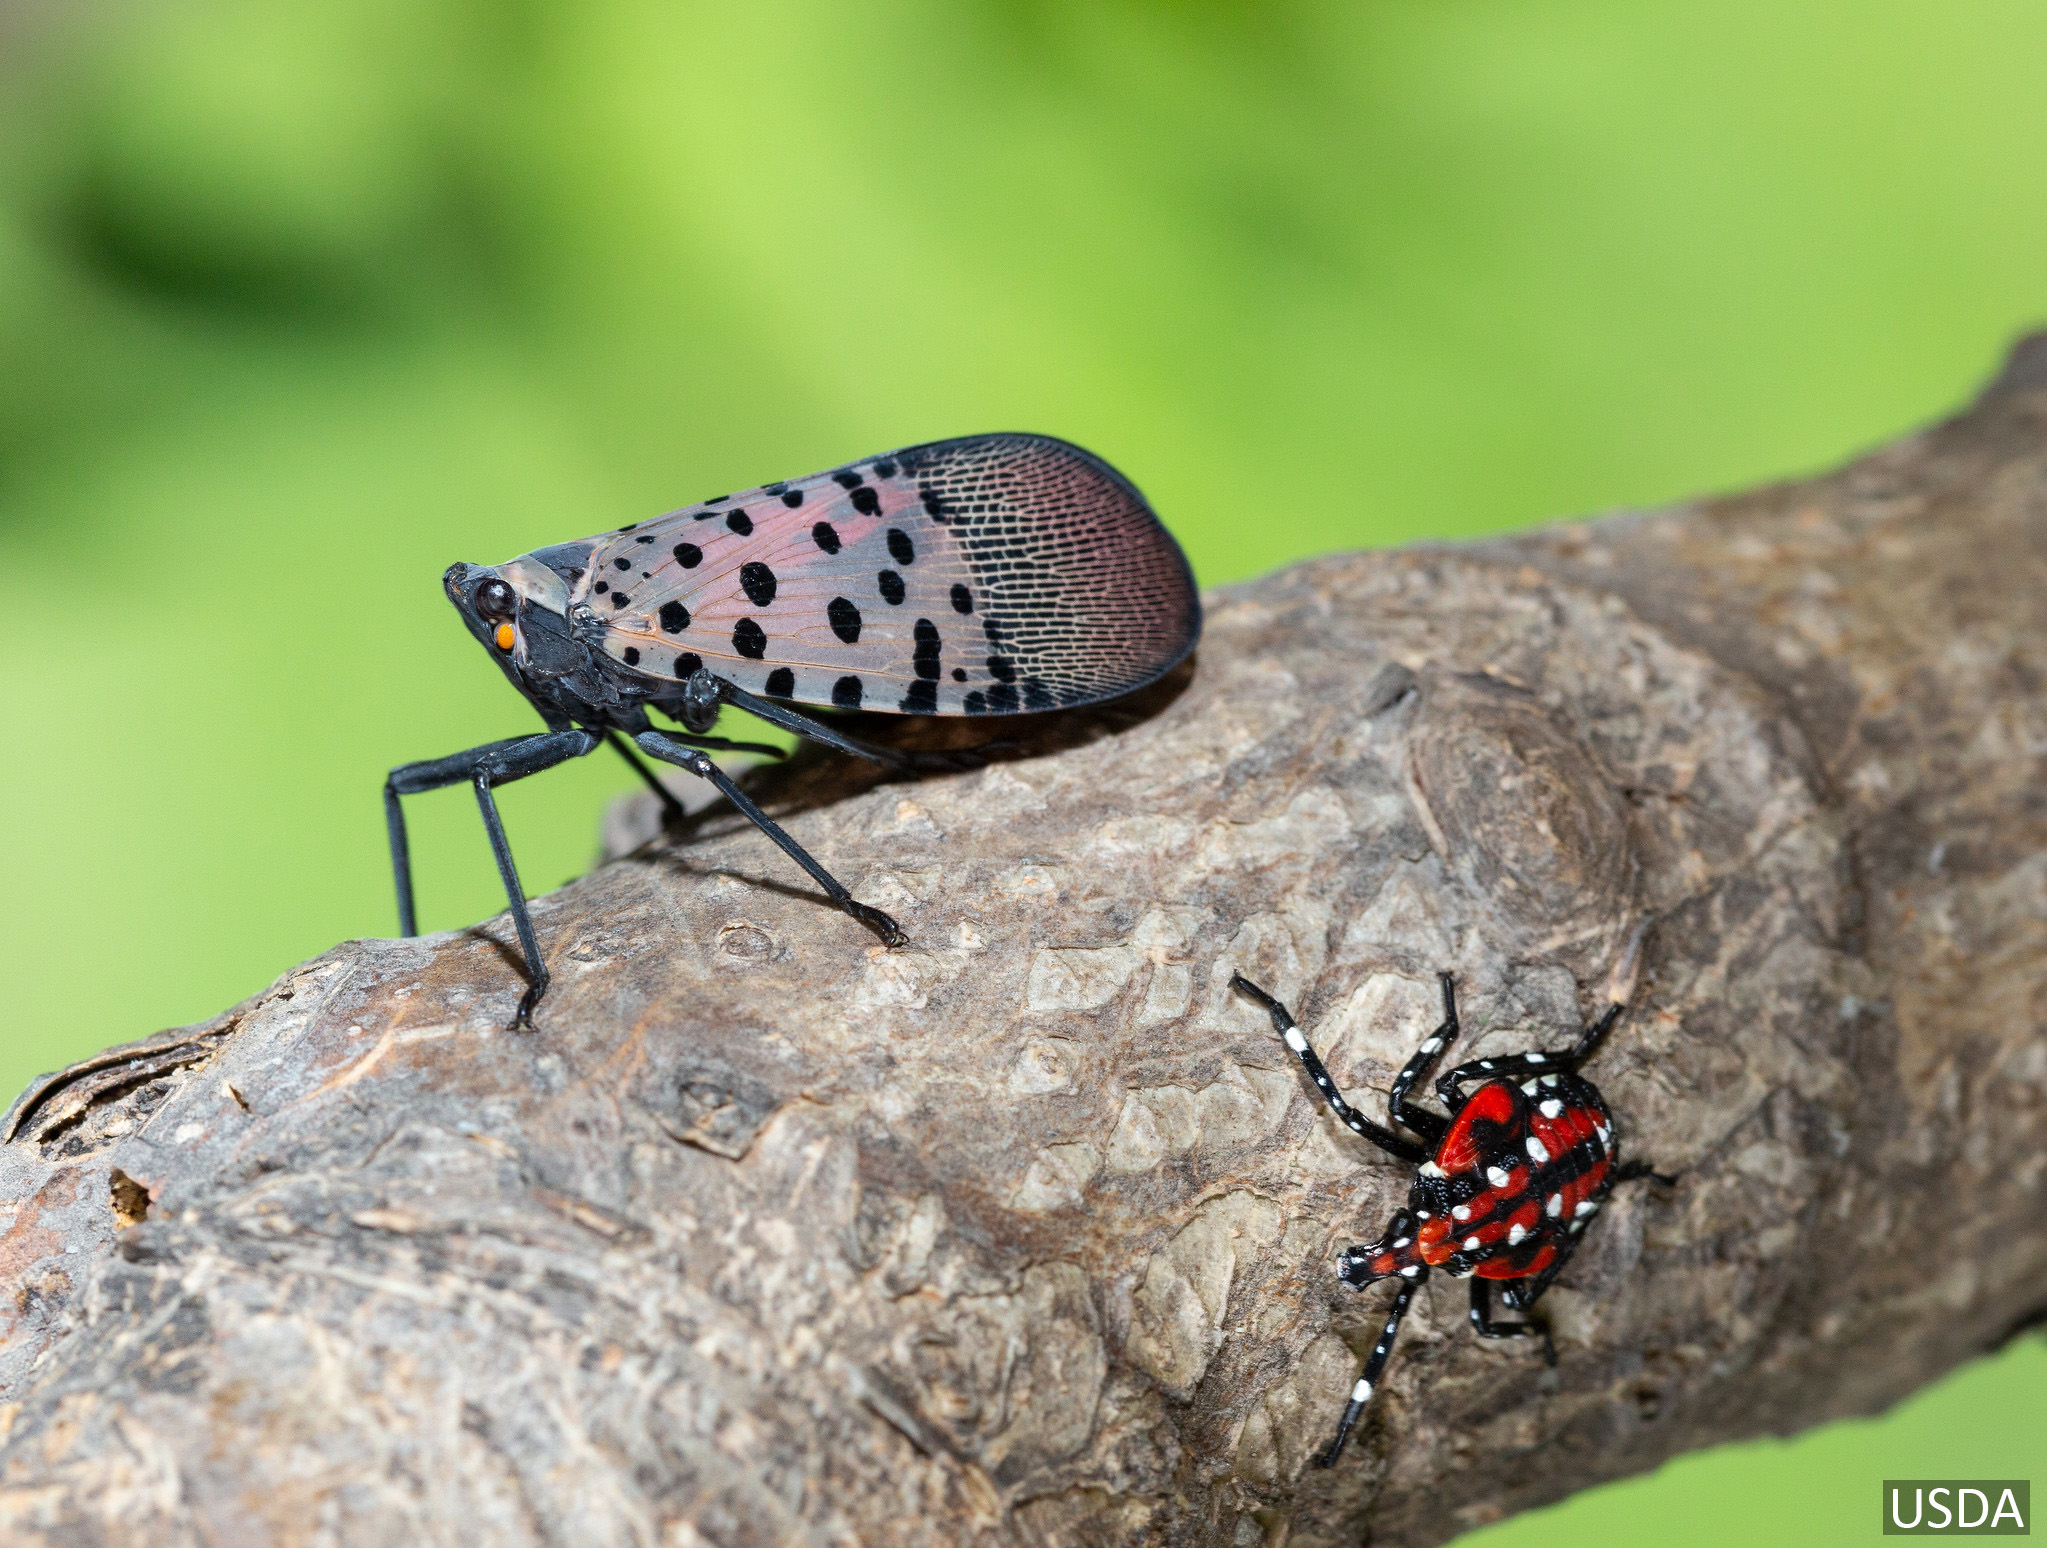 Adult spotted lanternfly are about 1 inch long.